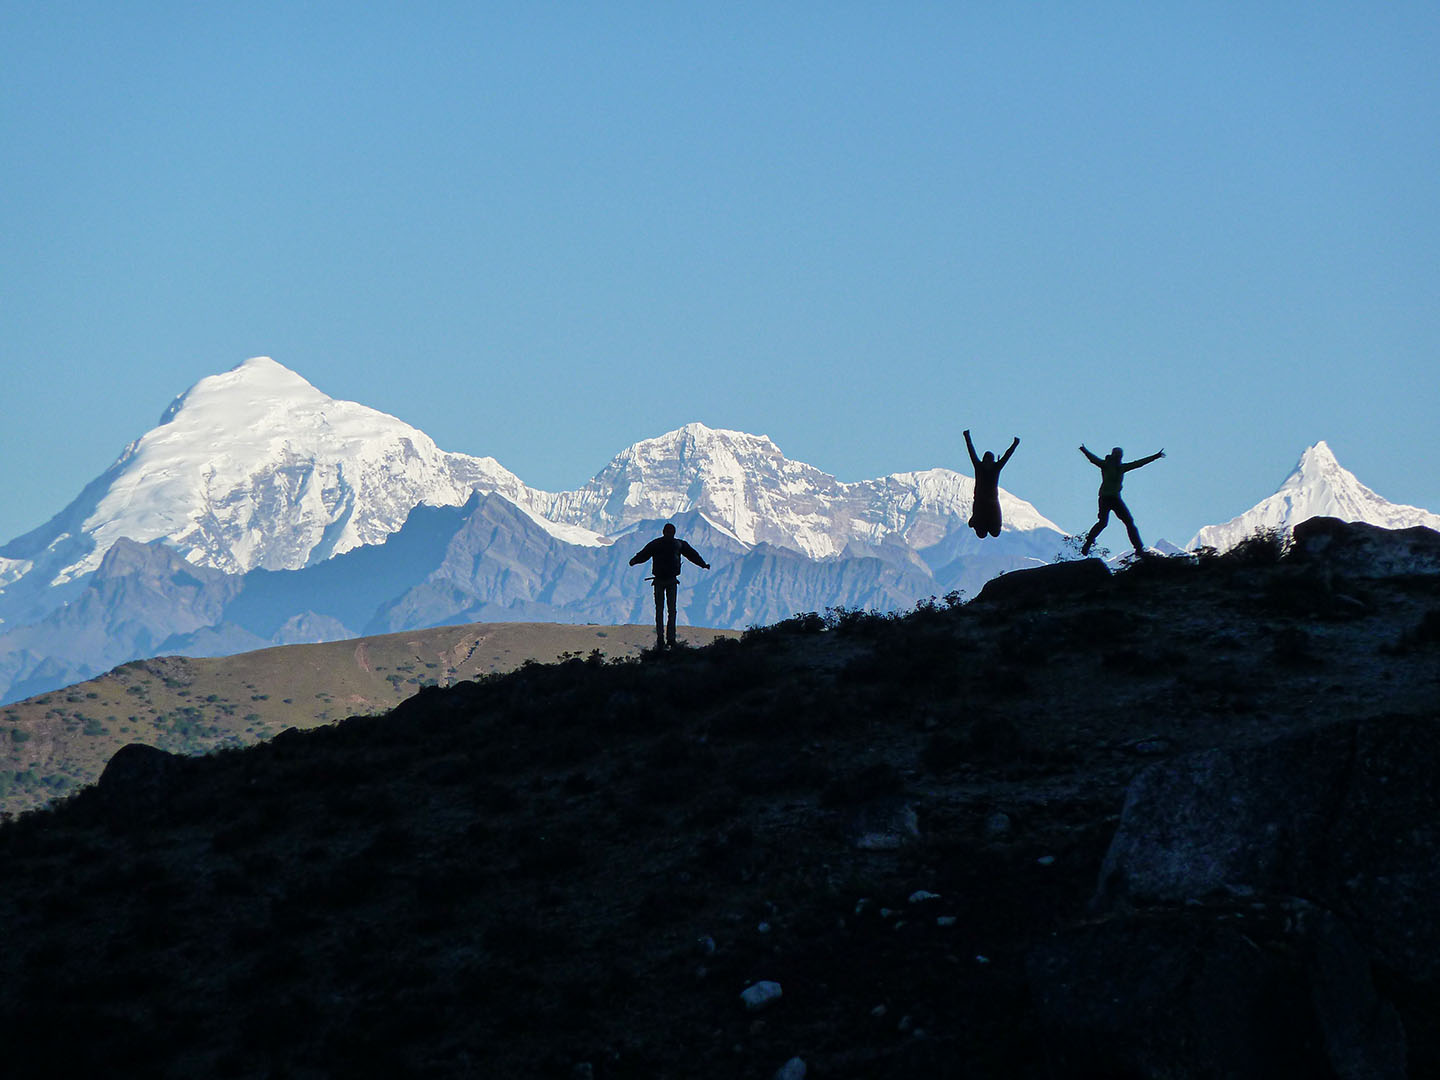 3 trekkers jumping on the mountain infront of the mighty Jomolhari